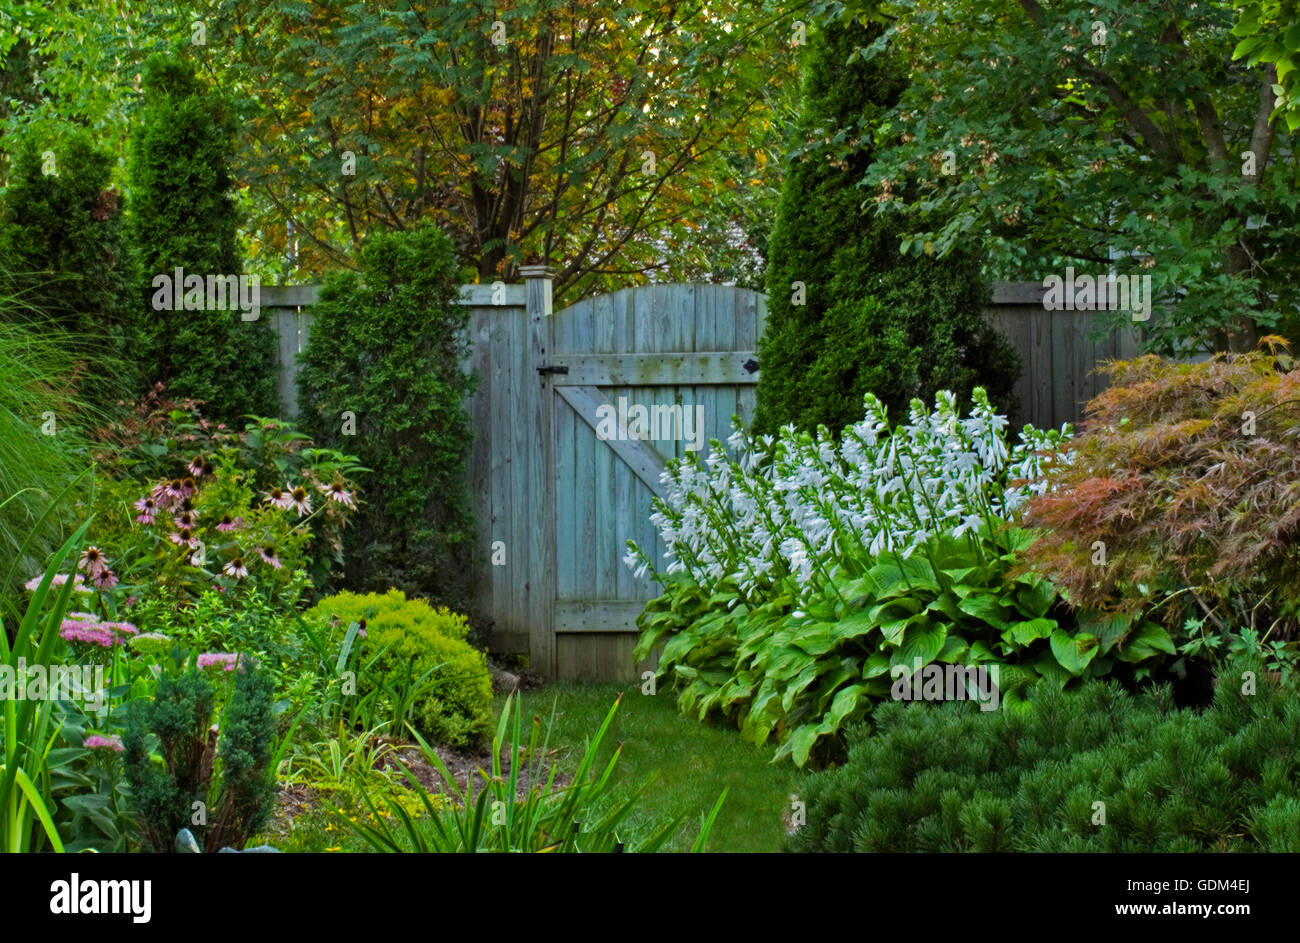 Garden gate with grass path lined with Hosta plantaginea in bloom., side garden Stock Photo